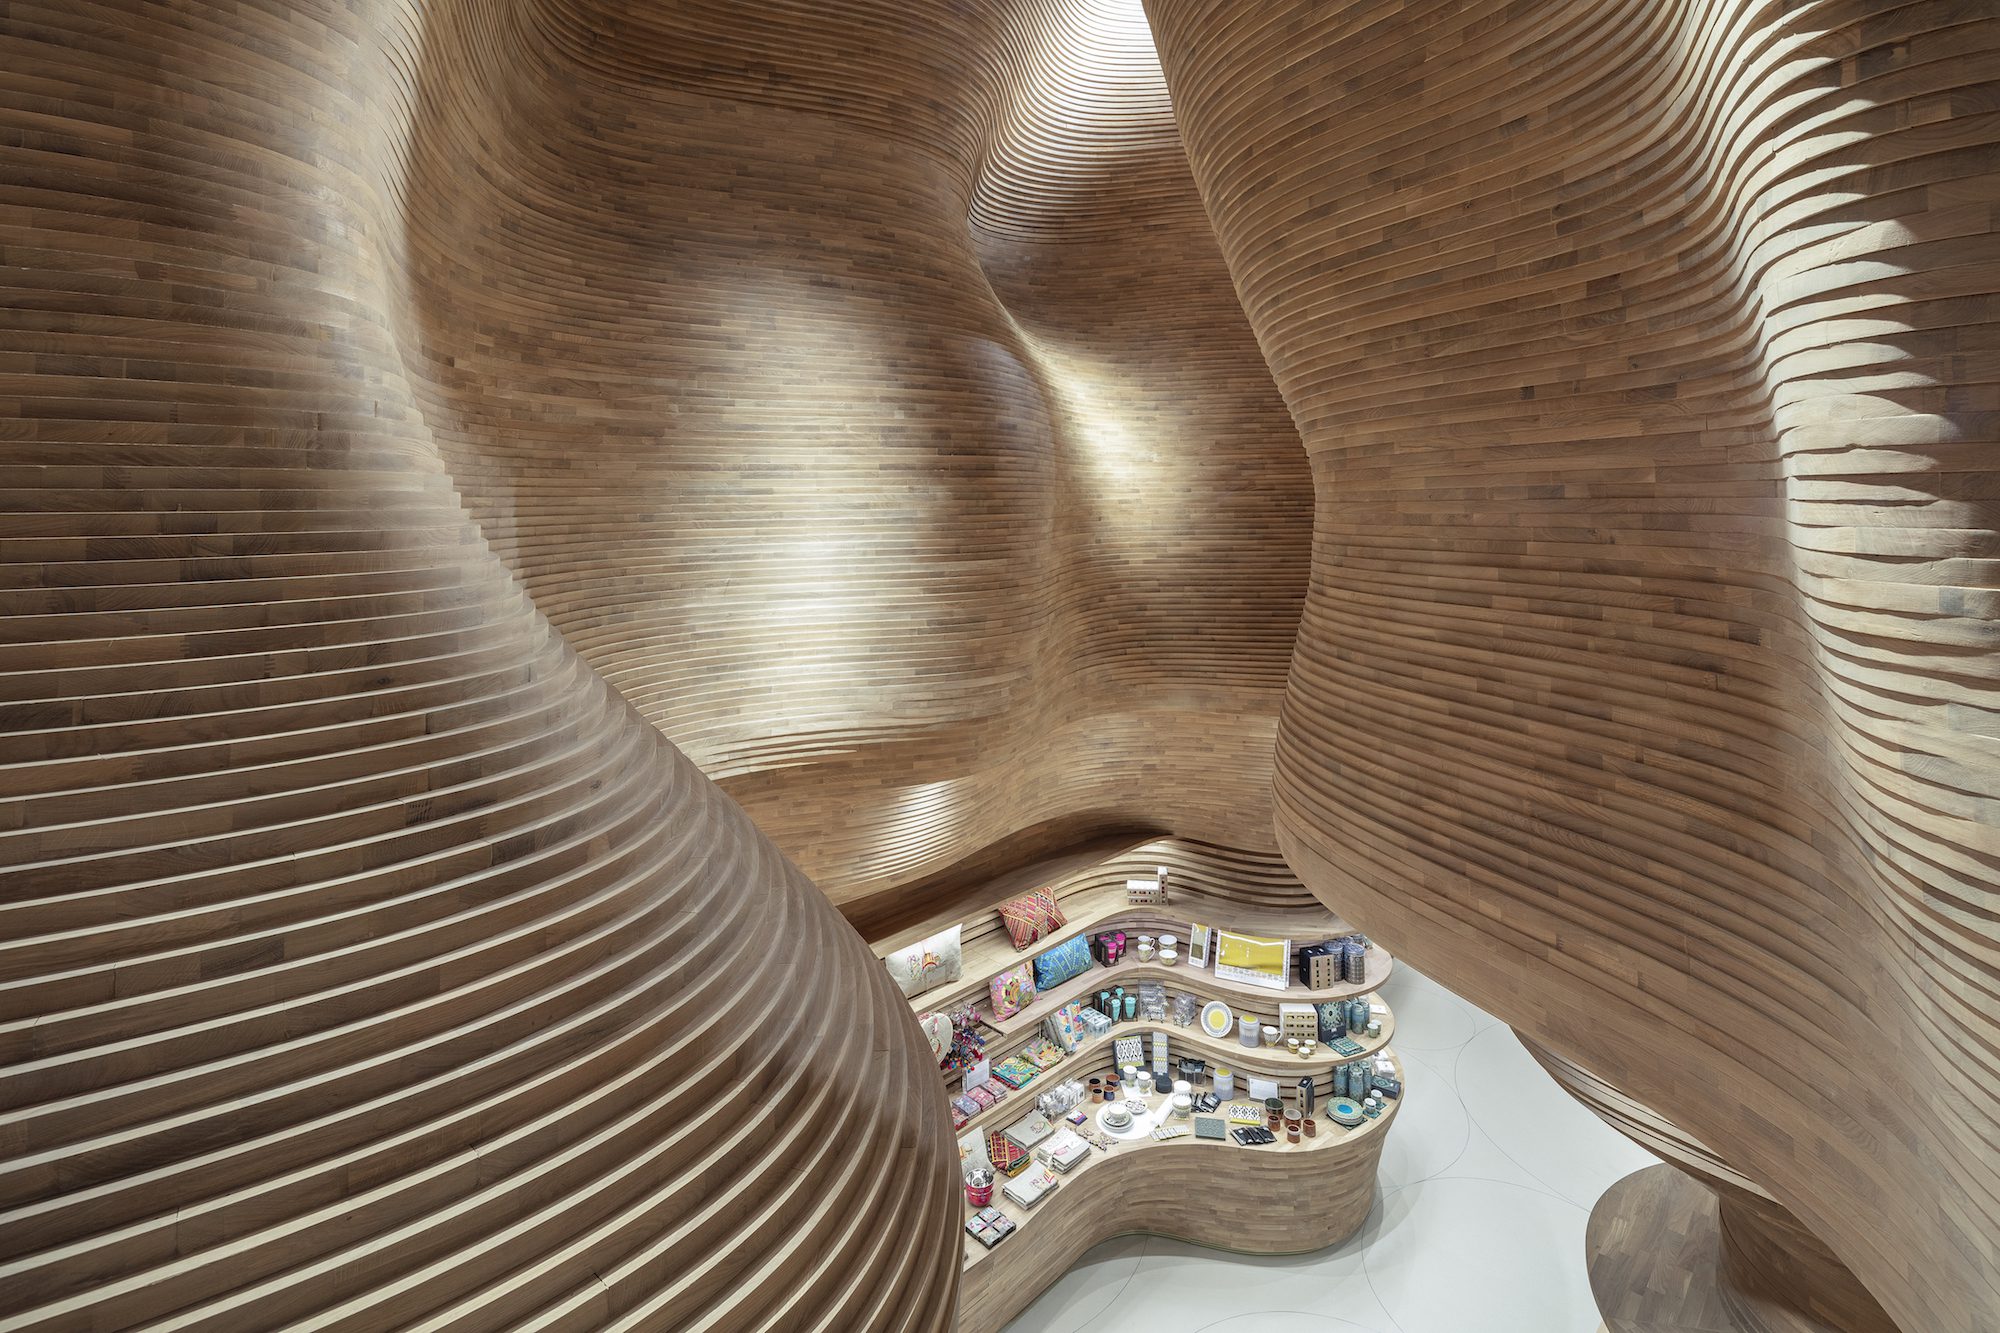 The sculptural walls in the National Museum of Qatar Gift Shops in Doha evoke a cave-like atmosphere. Credit: Tom Ferguson